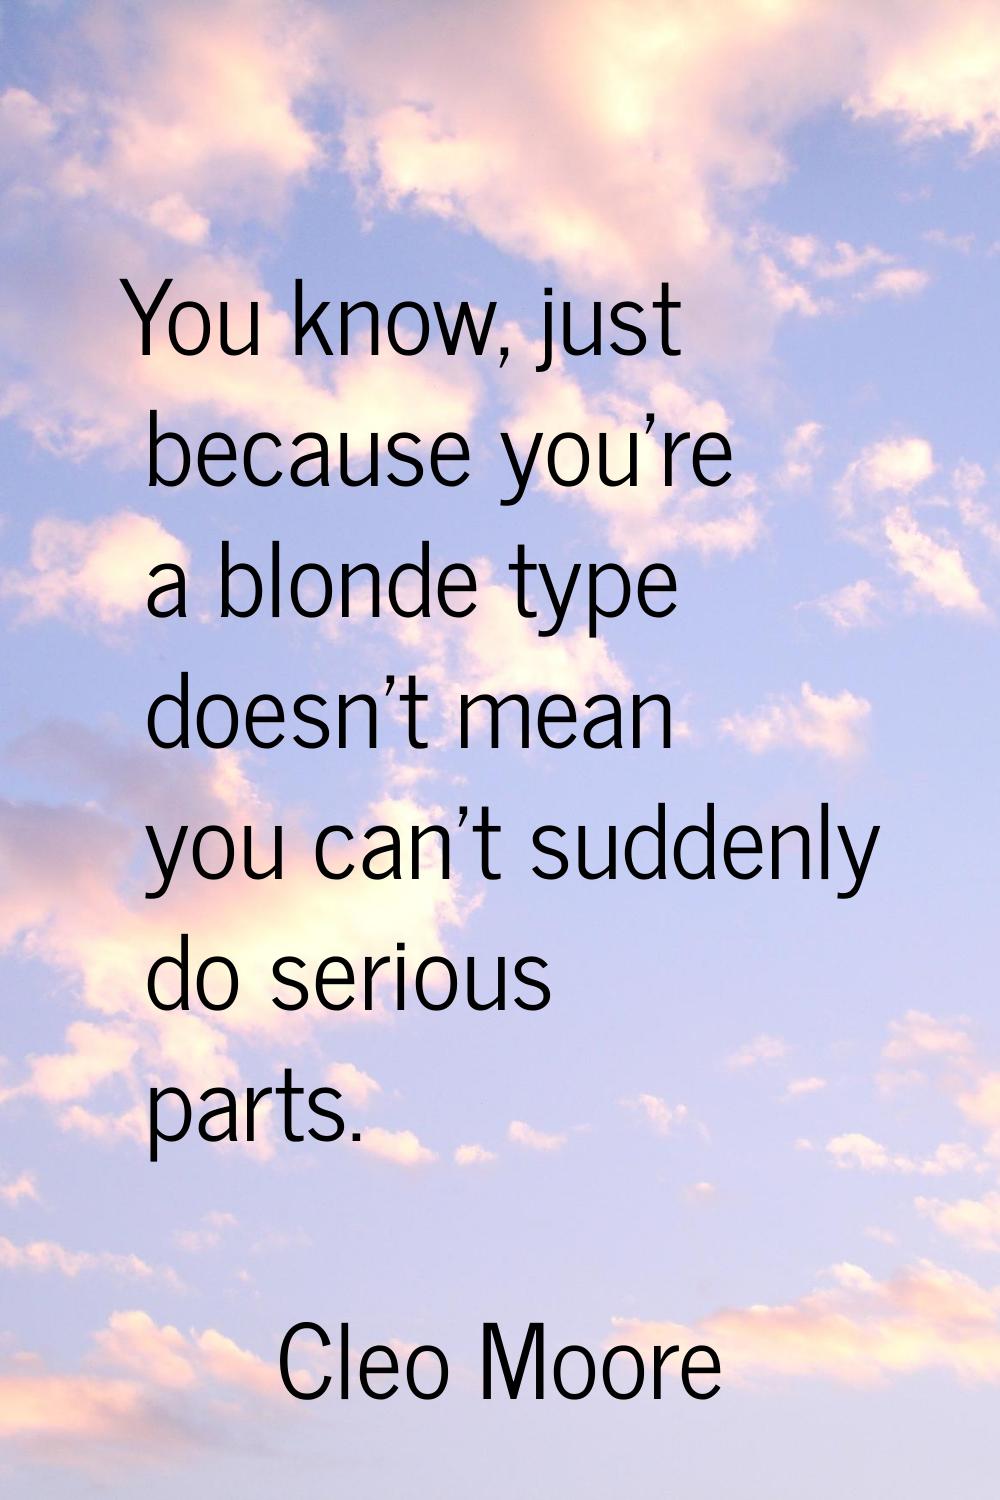 You know, just because you're a blonde type doesn't mean you can't suddenly do serious parts.